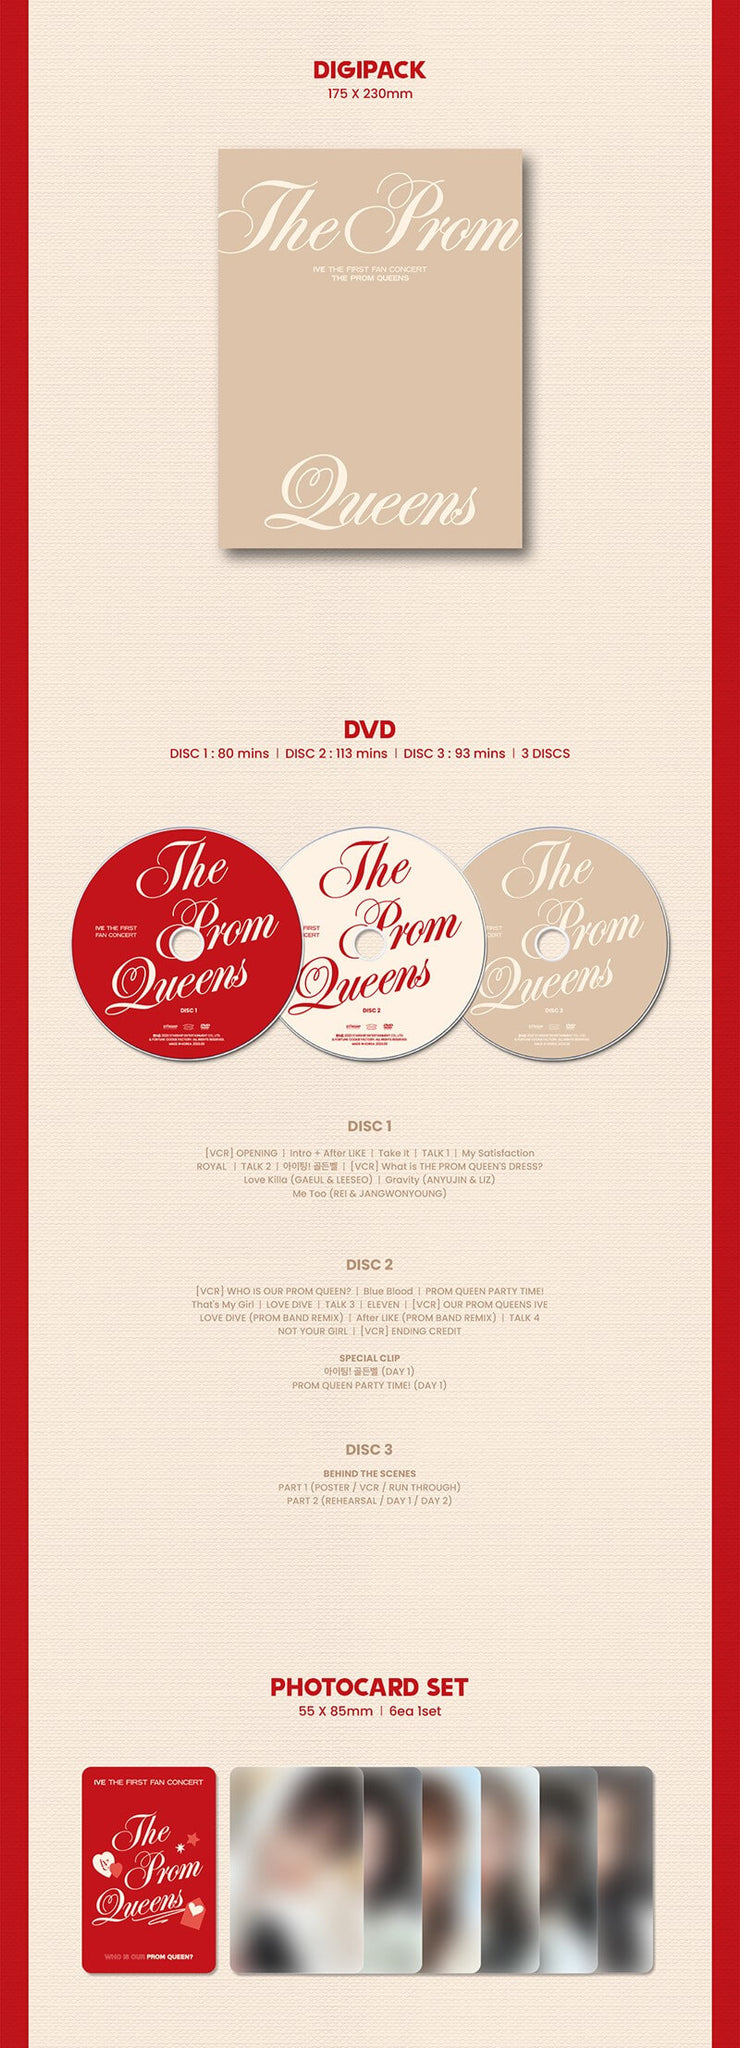 IVE THE FIRST FAN CONCERT The Prom Queens DVD Inclusions Digipack 3Discs Photocard Set